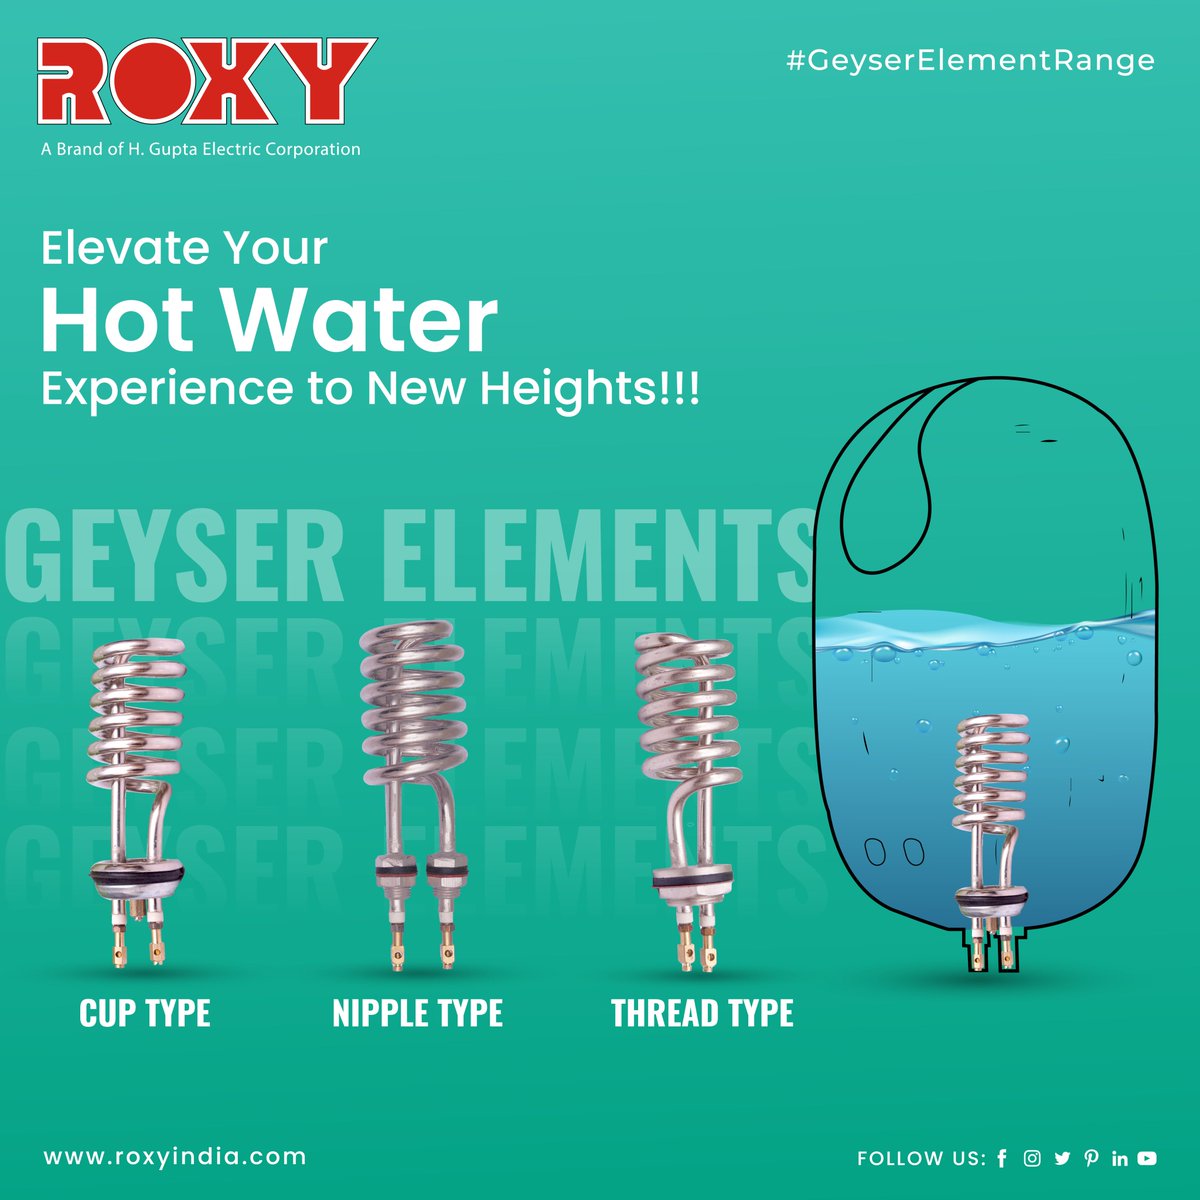 Elevate Your Hot Water Experience to New Heights with the Roxy Electric Kettle!
.
.
.
For more visit:- roxyindia.com
.
.
.
#RoxyElectricKettle #HotWaterElevation #NewHeightsOfConvenience #SipInStyle #EffortlessBrewing #SavorTheFlavor #TimeToUpgrade #ModernKettle